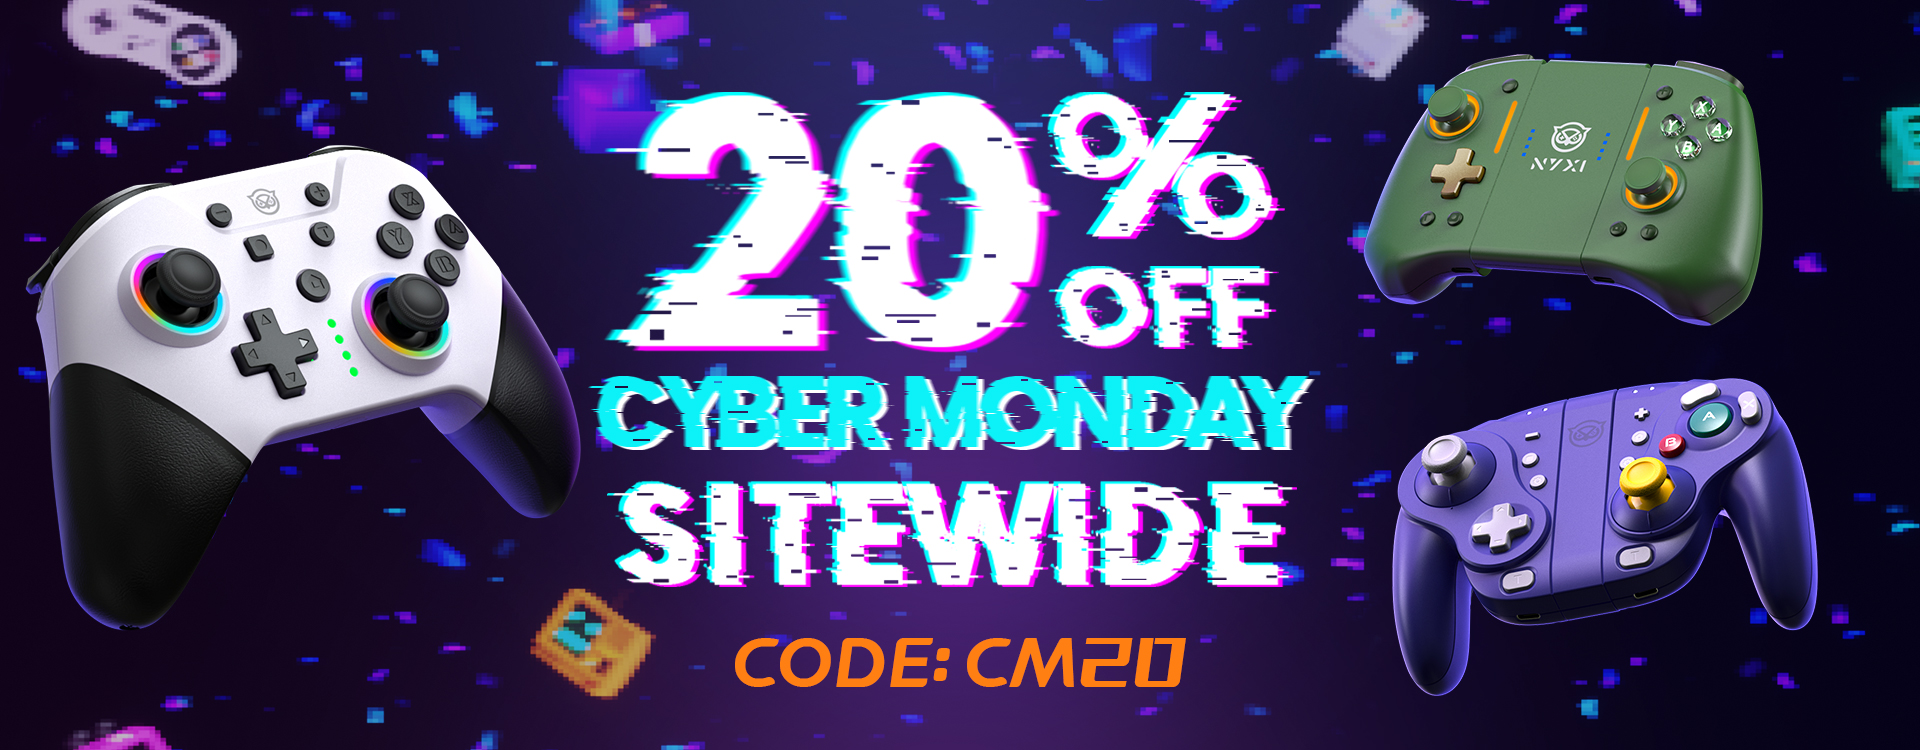 nyxi cyber monday sale 20% off sitewide